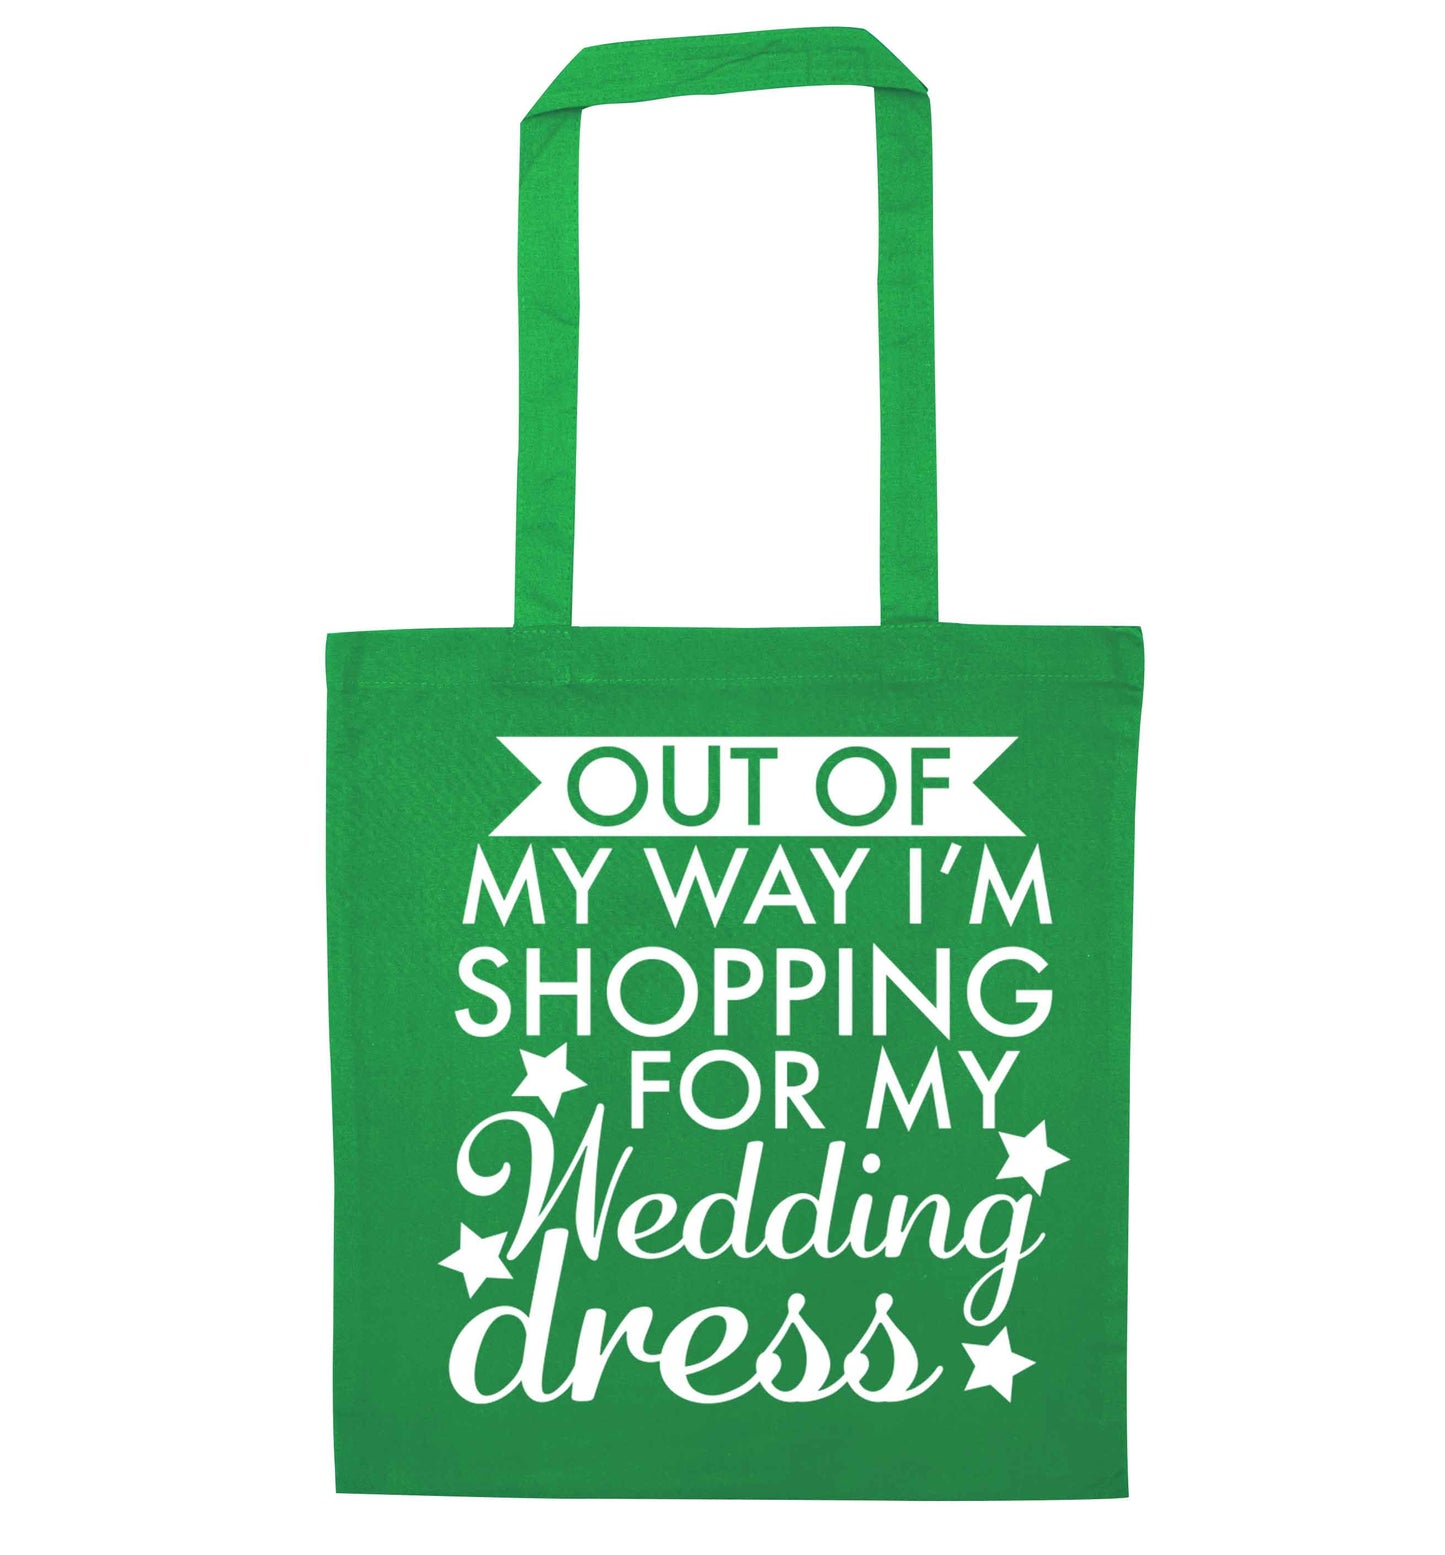 Out of my way I'm shopping for my wedding dress green tote bag